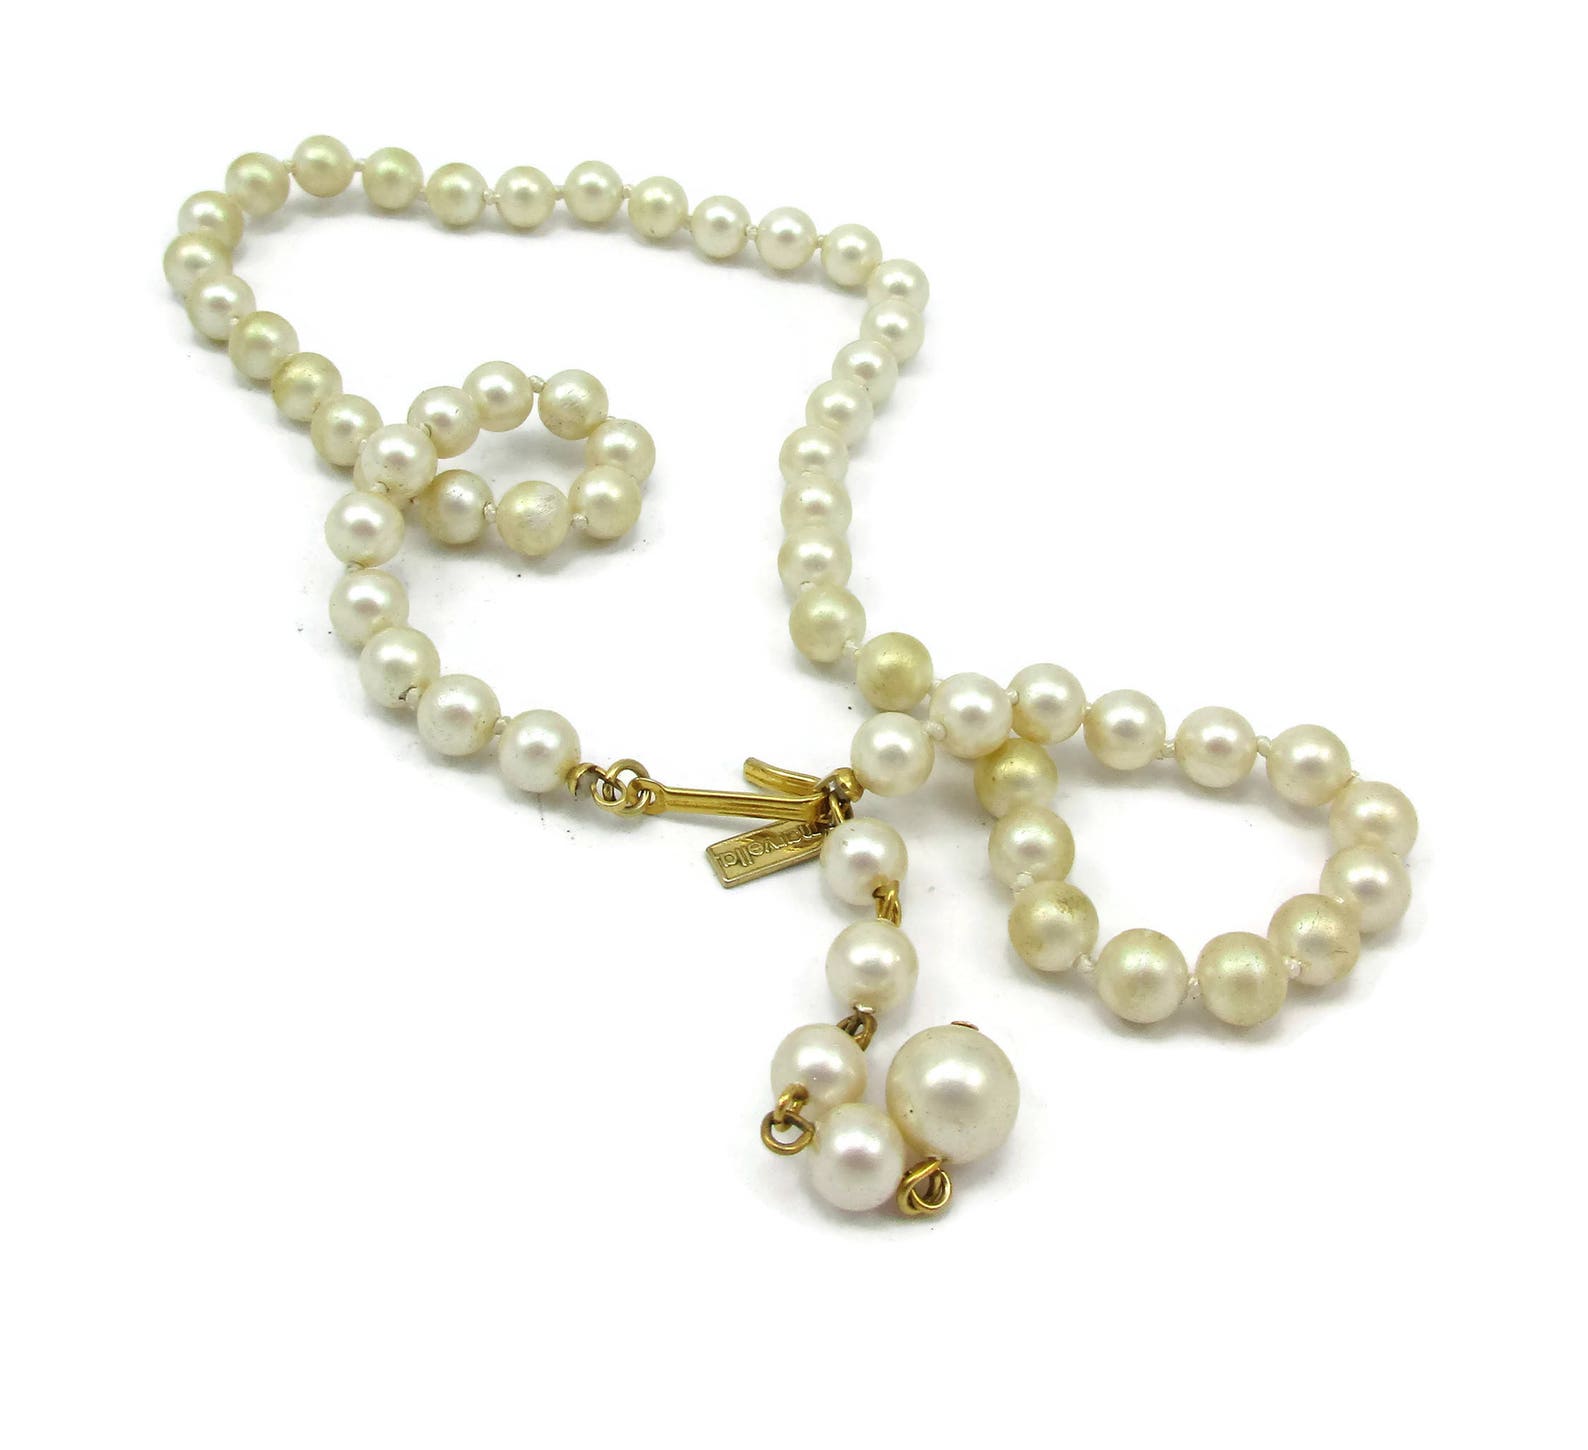 Marvella Pearl Necklace Gold Tone Necklace Bridal Jewelry 16 - Etsy